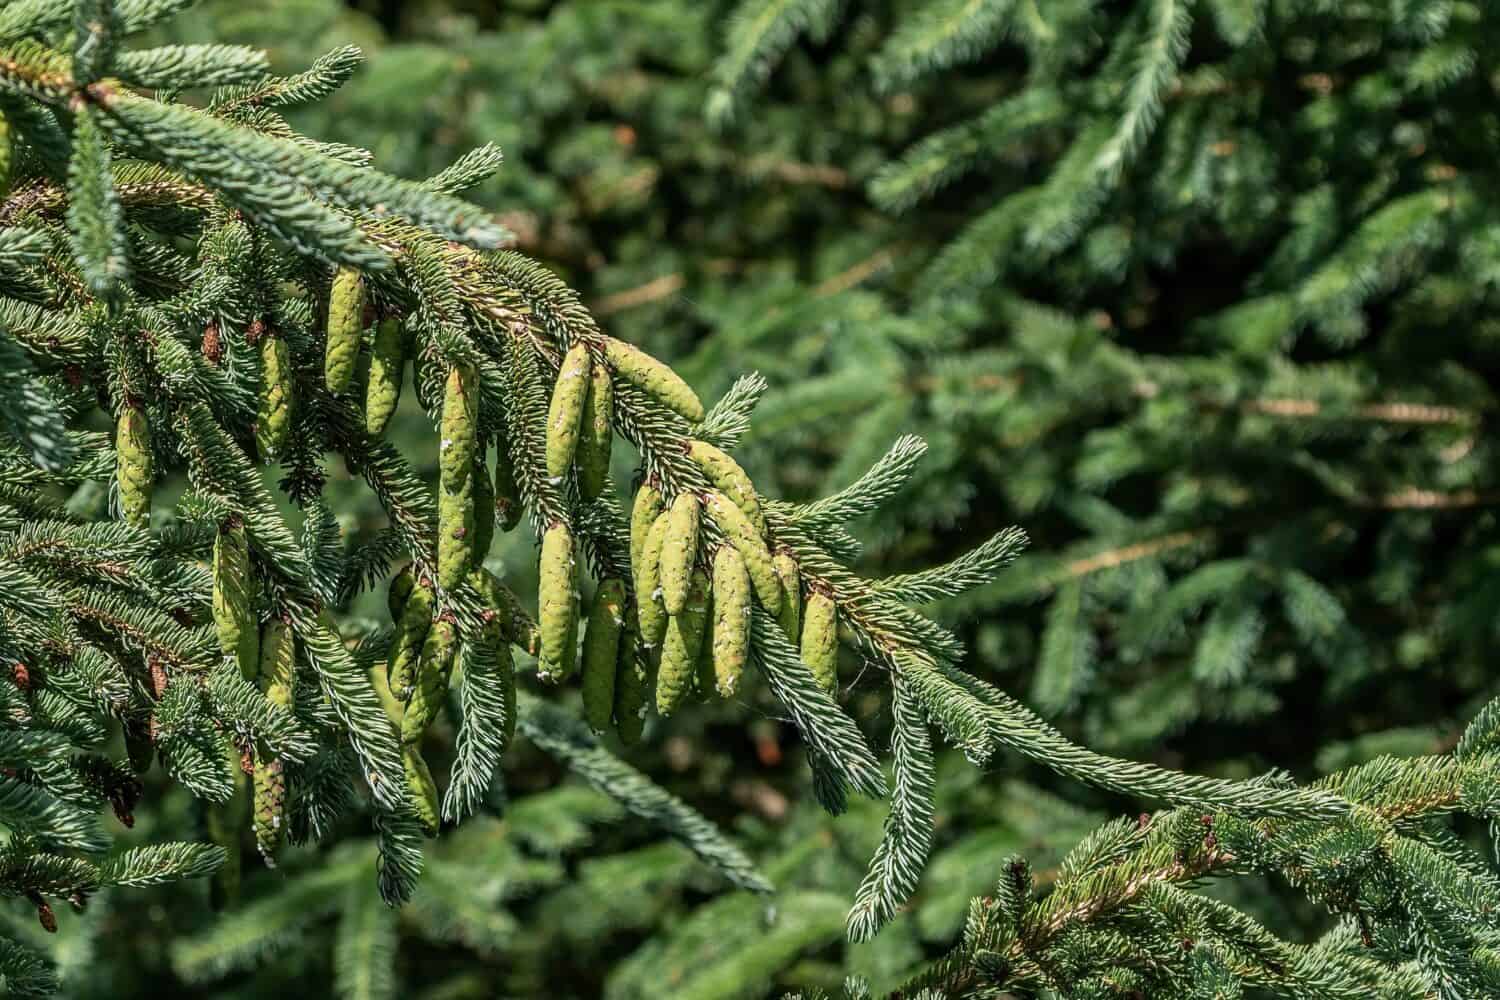 A branch of a Spruce Tree, Sitka, Picea sitchensis, growing in woodland